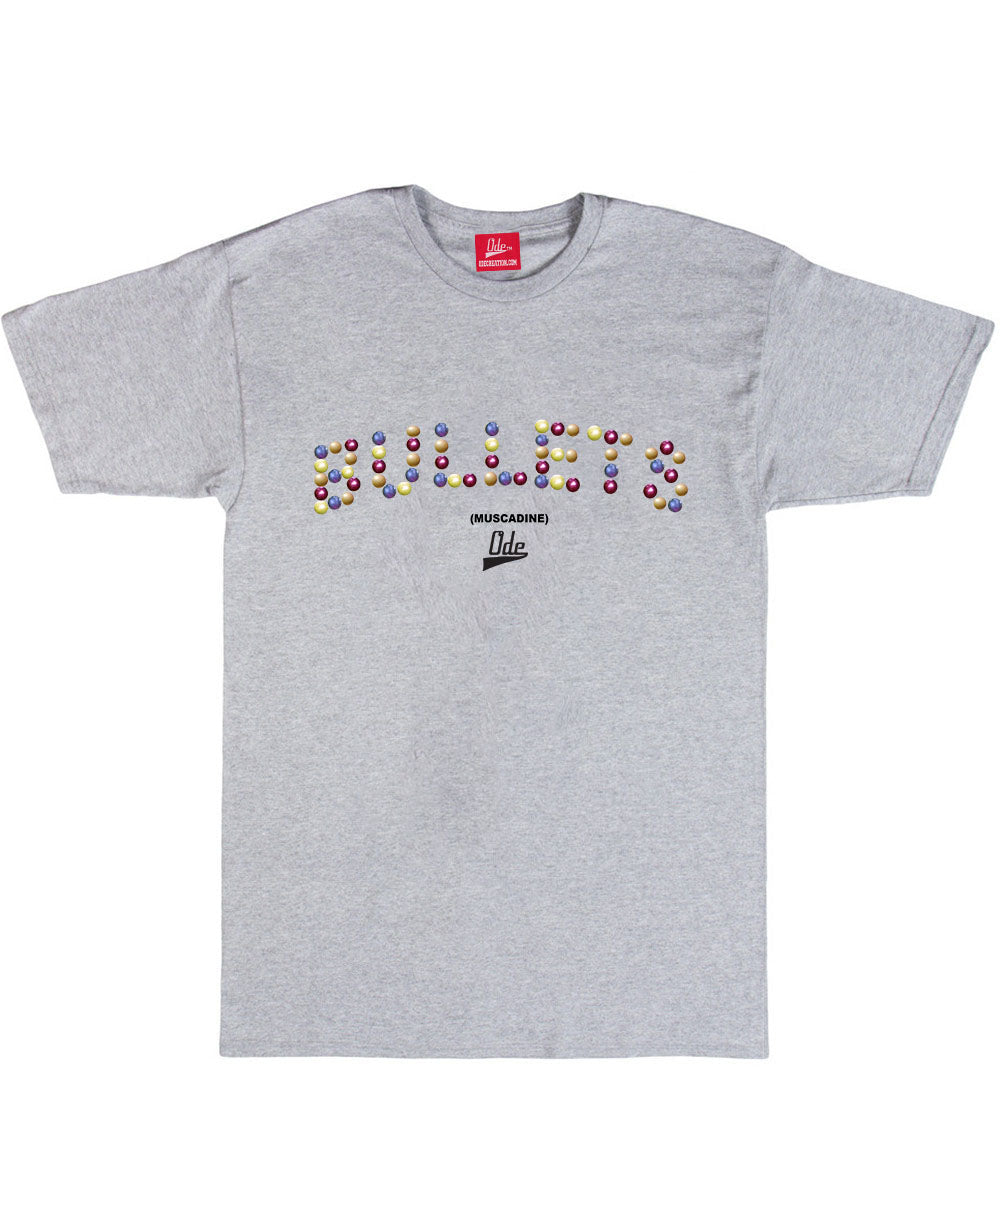 The Ode Bullet( Muscadine) T-shirt- Grey